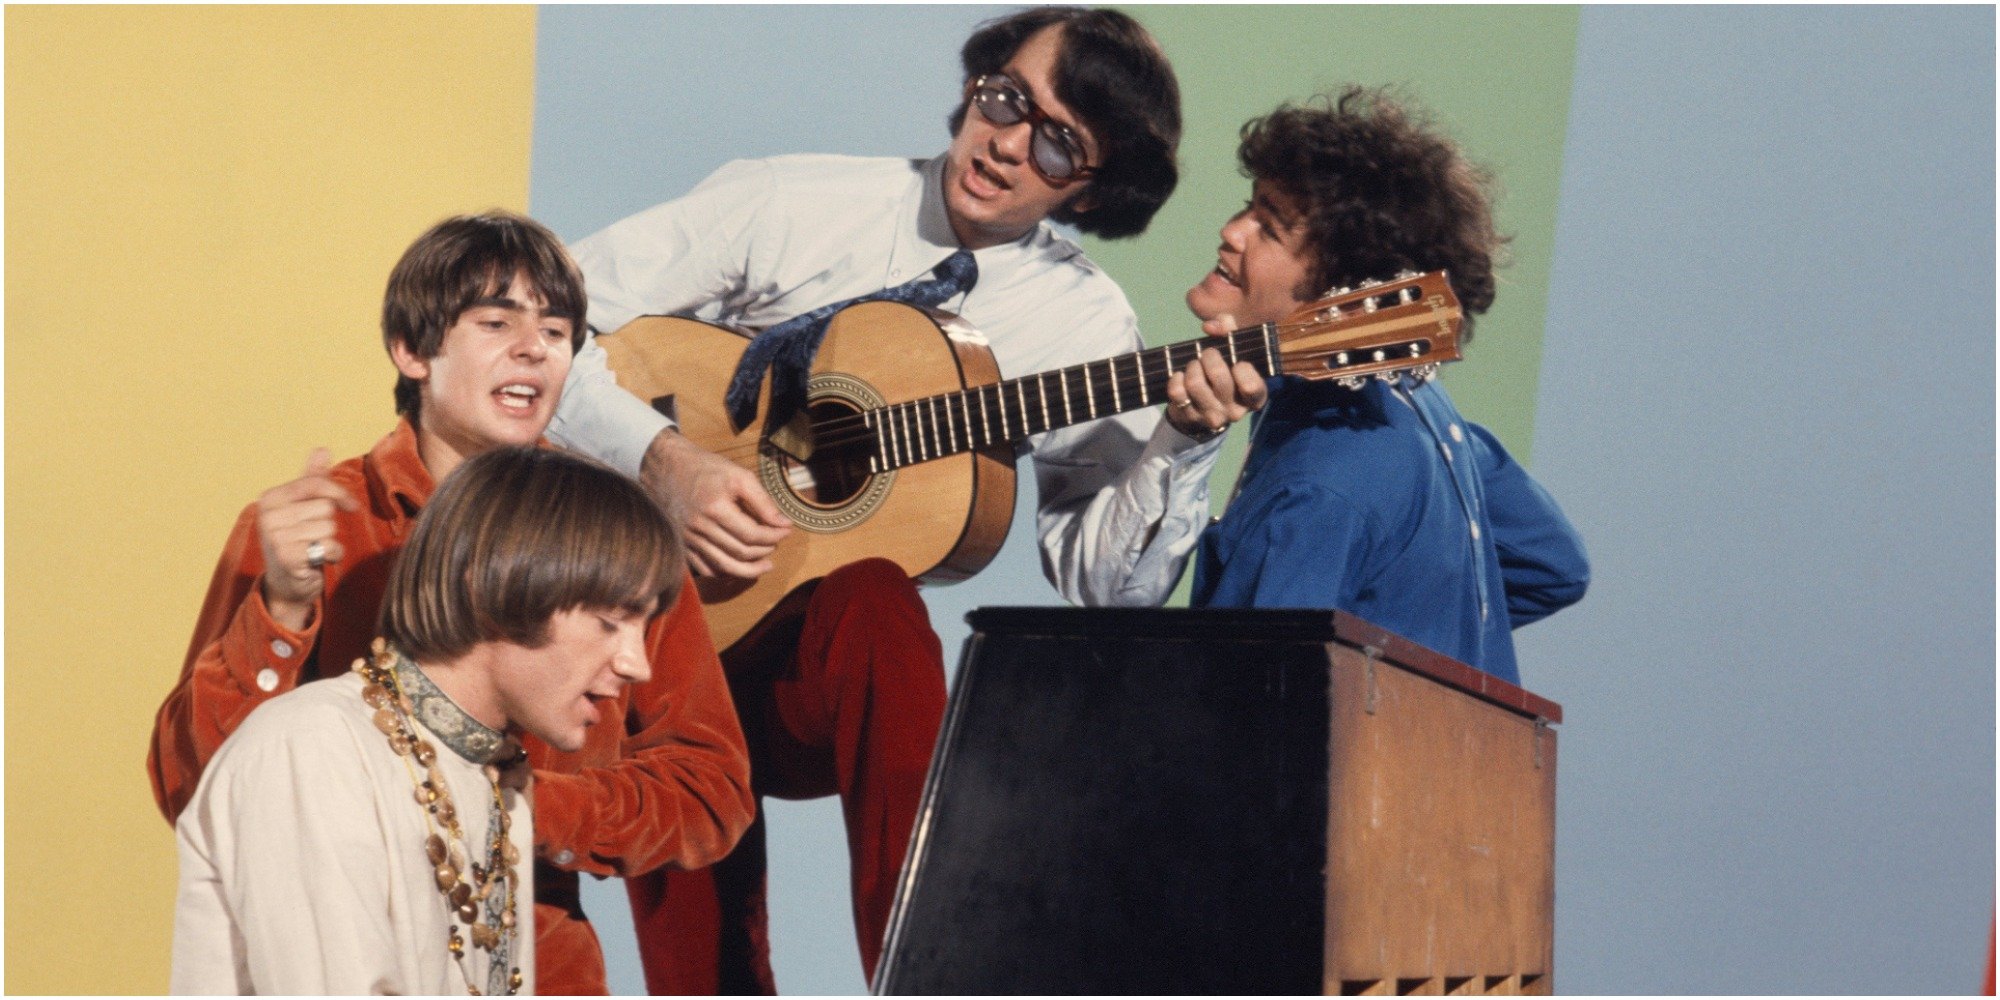 The Monkees pose for a publicity photo on the set of The Monkees televisoin show.